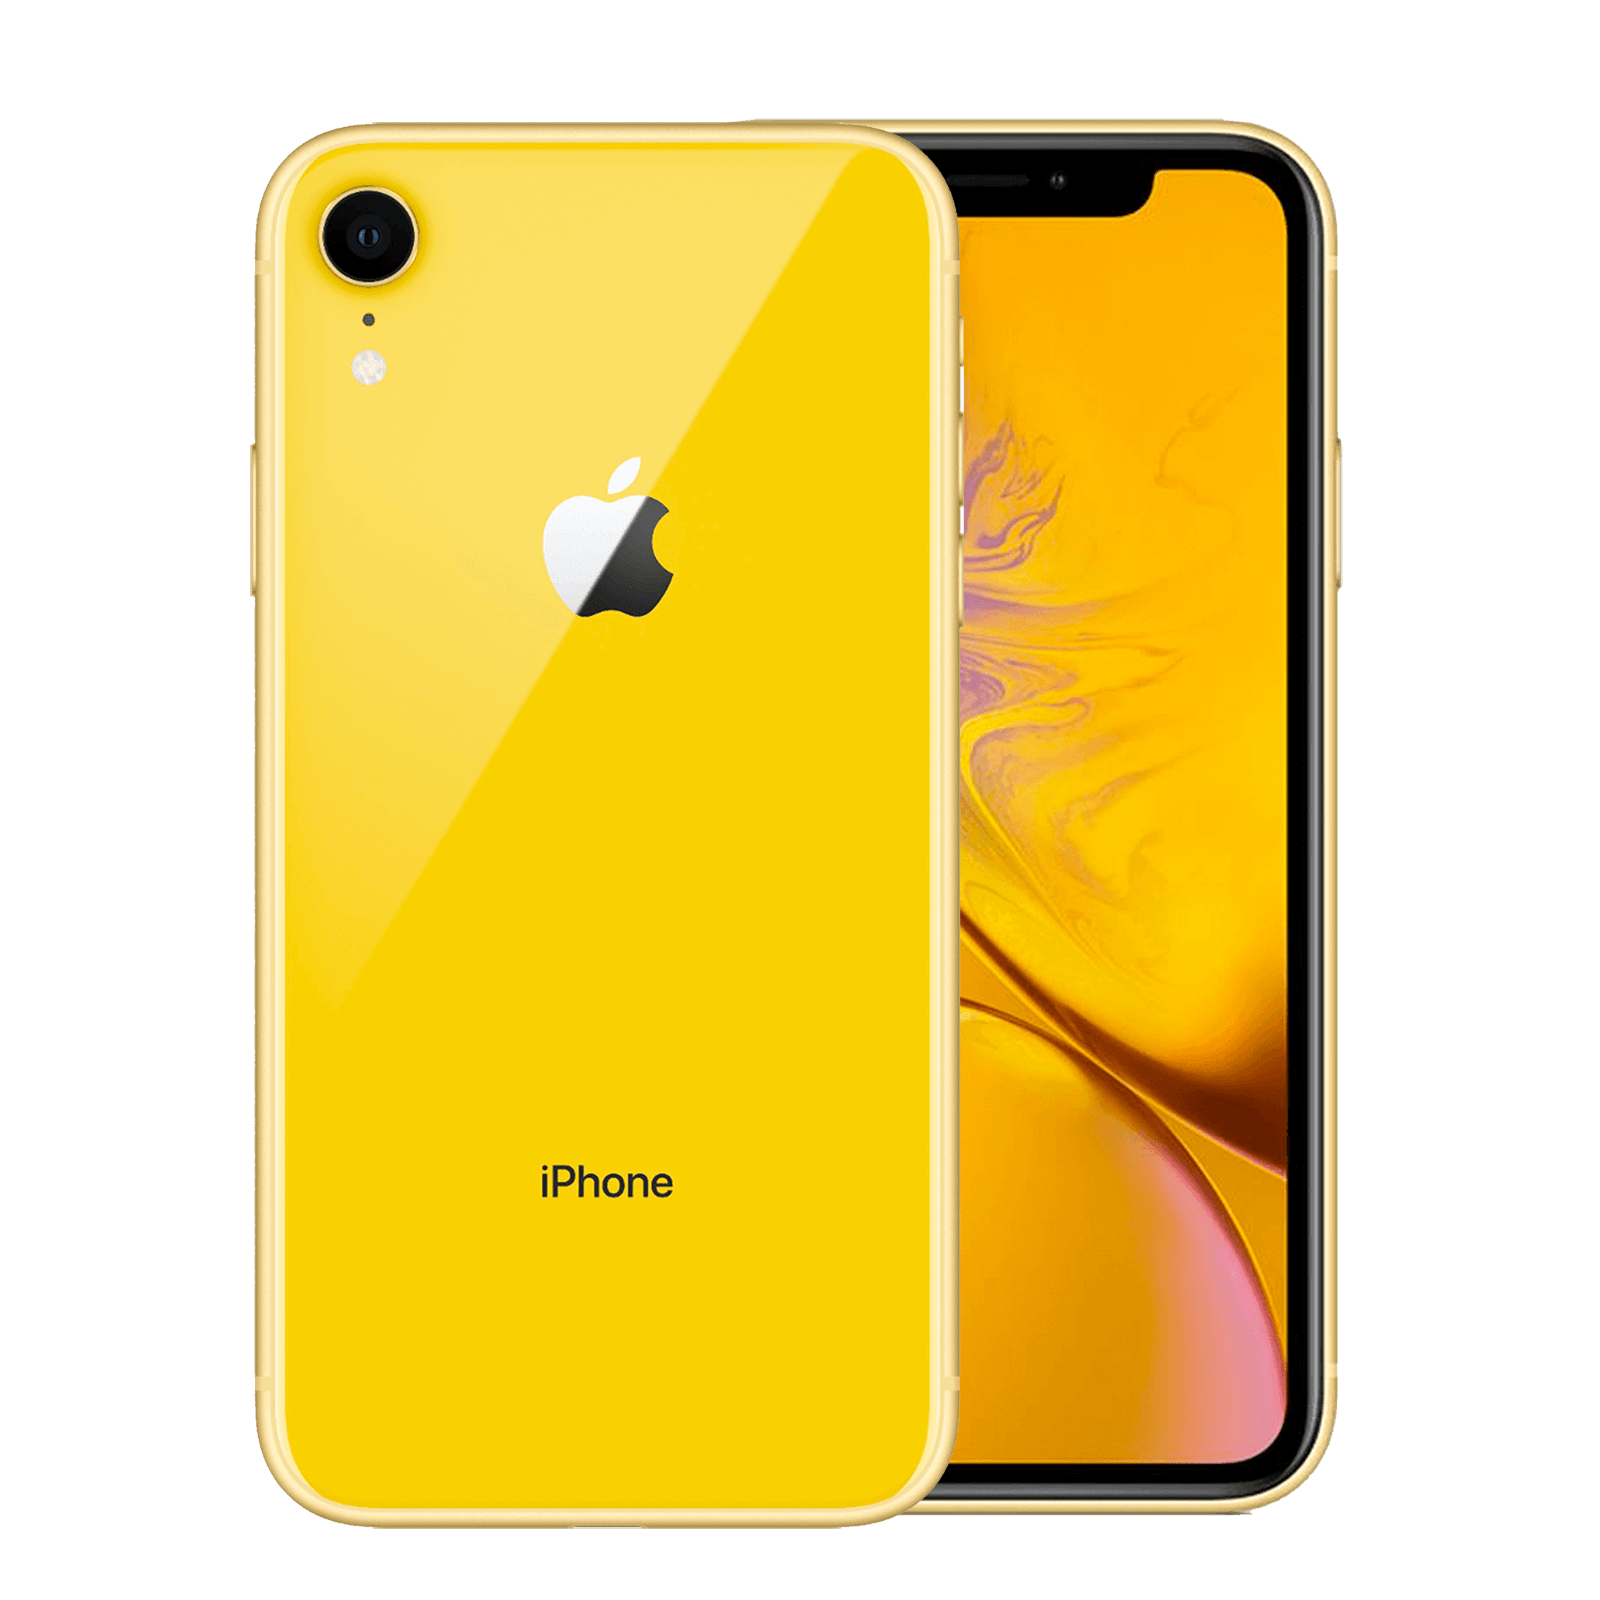 Apple iPhone XR 128GB Yellow Very Good - T-Mobile